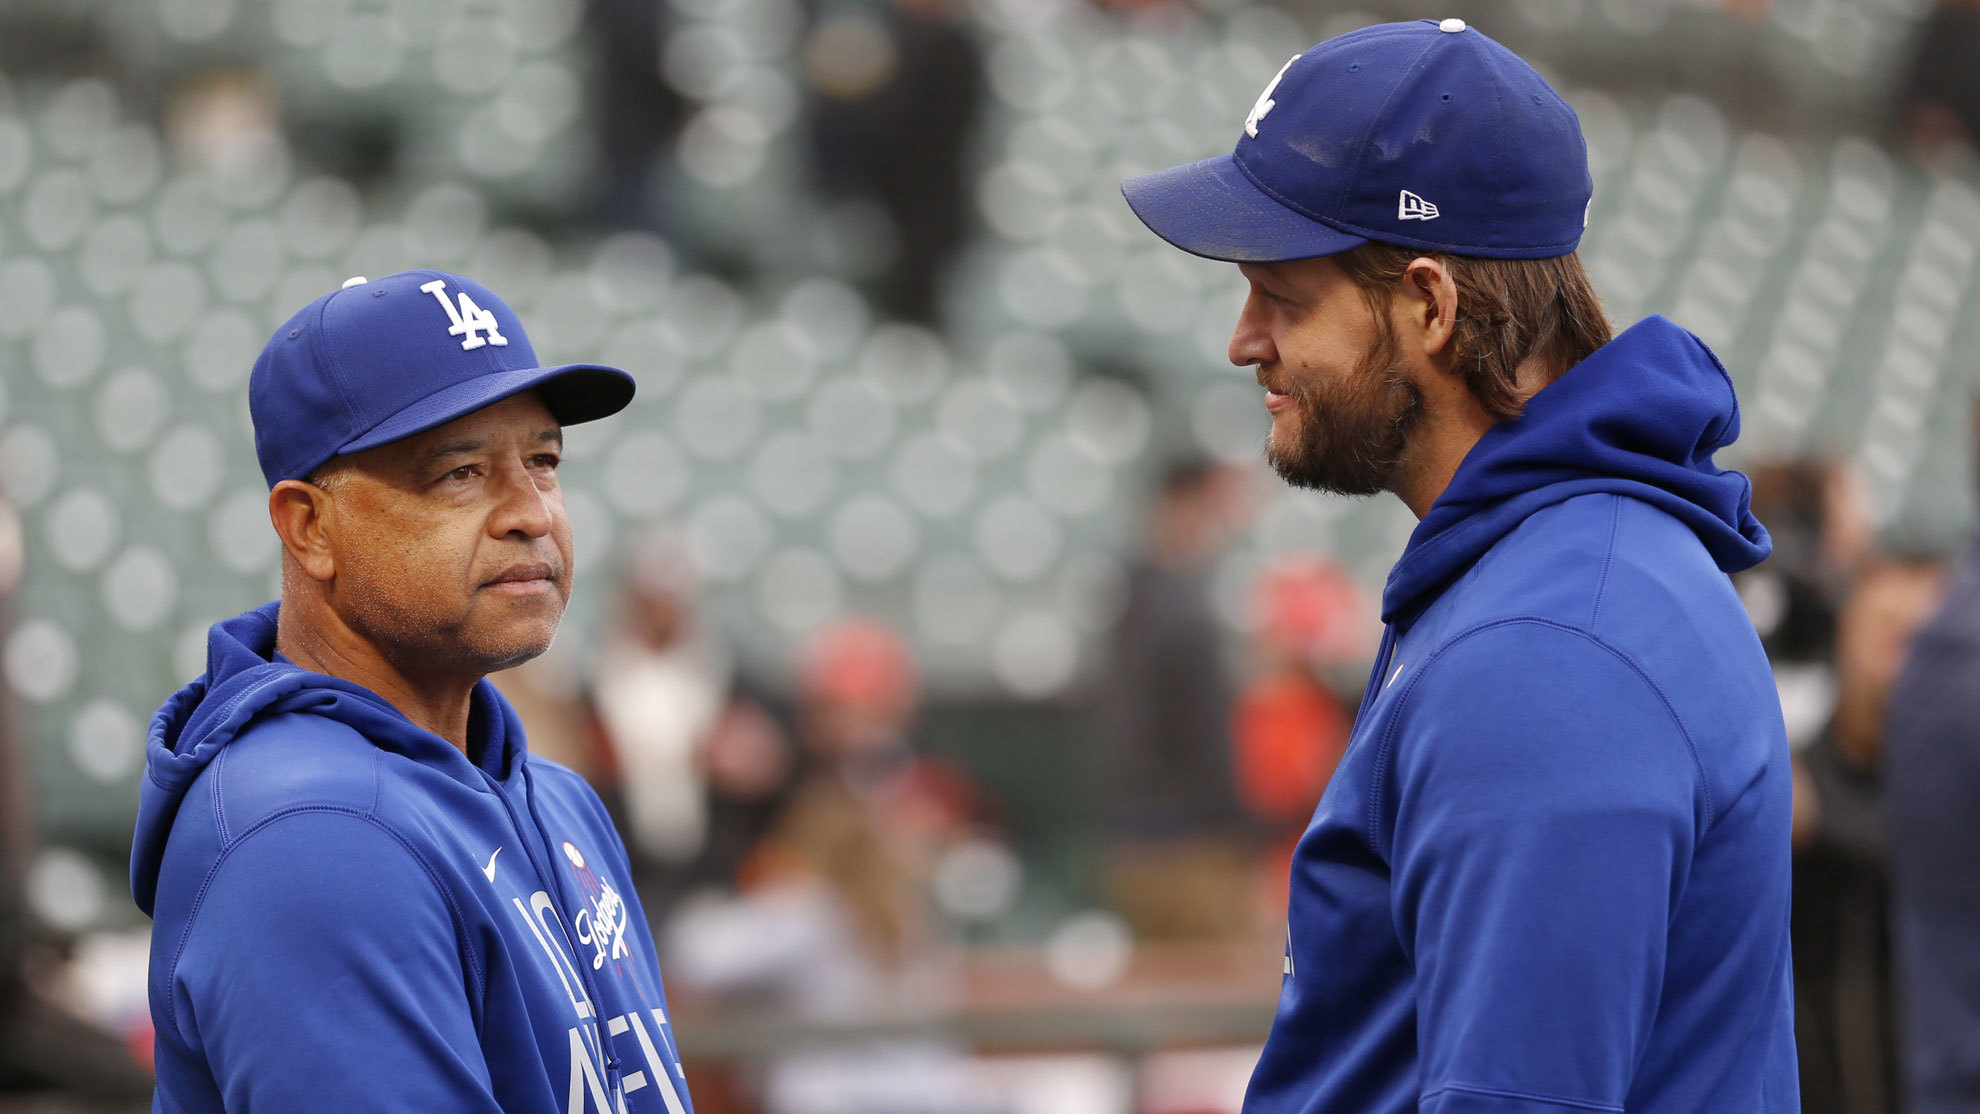 Clayton Kershaw stays with the Dodgers